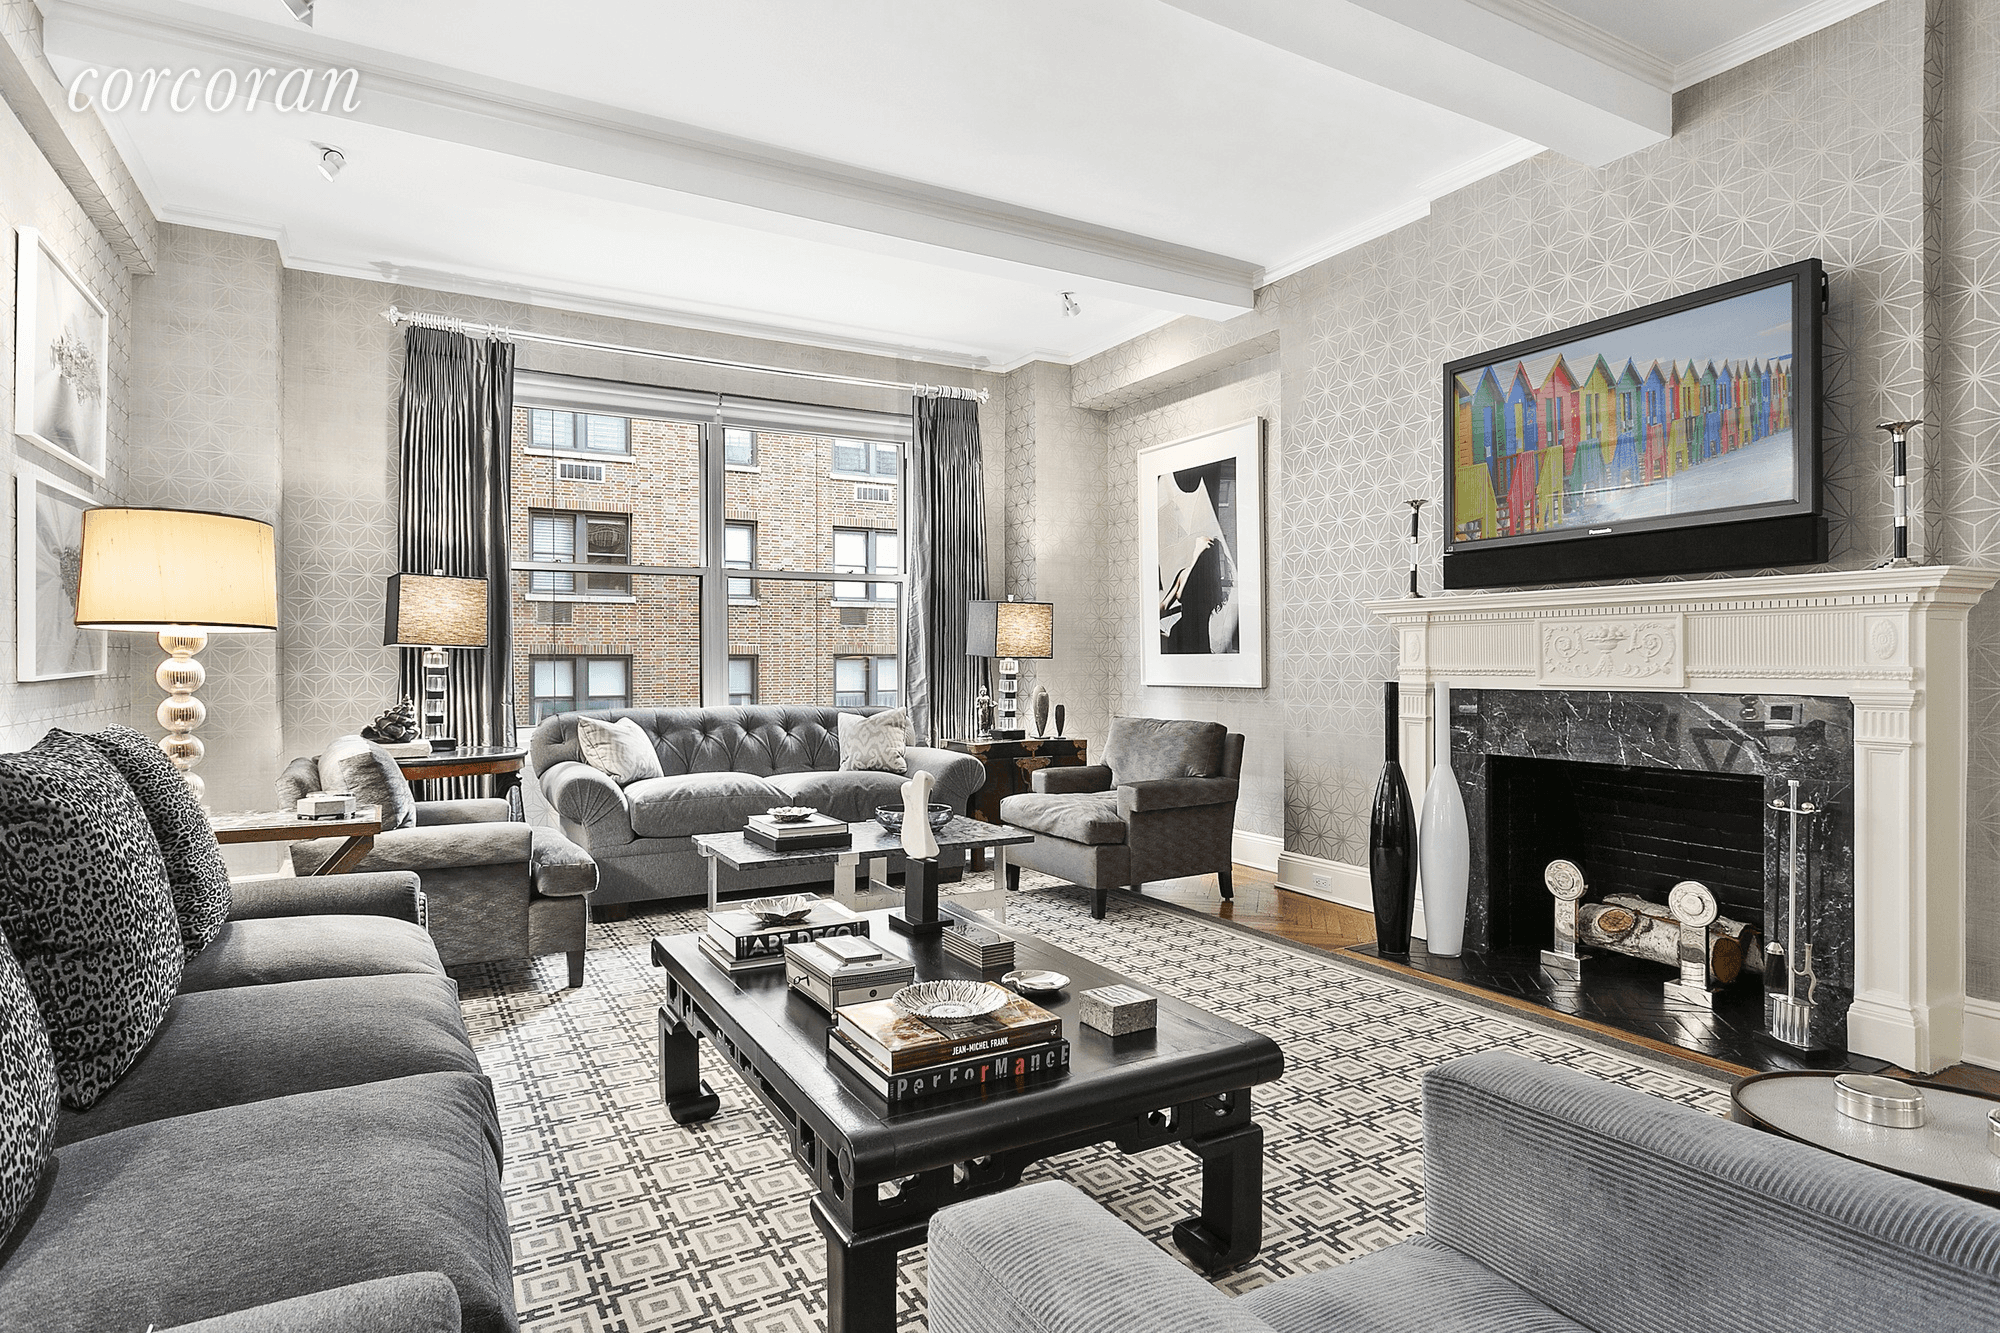 Move in with no renovations to this new listing of a pre war nine room apartment in a premier Upper East Side co operative.